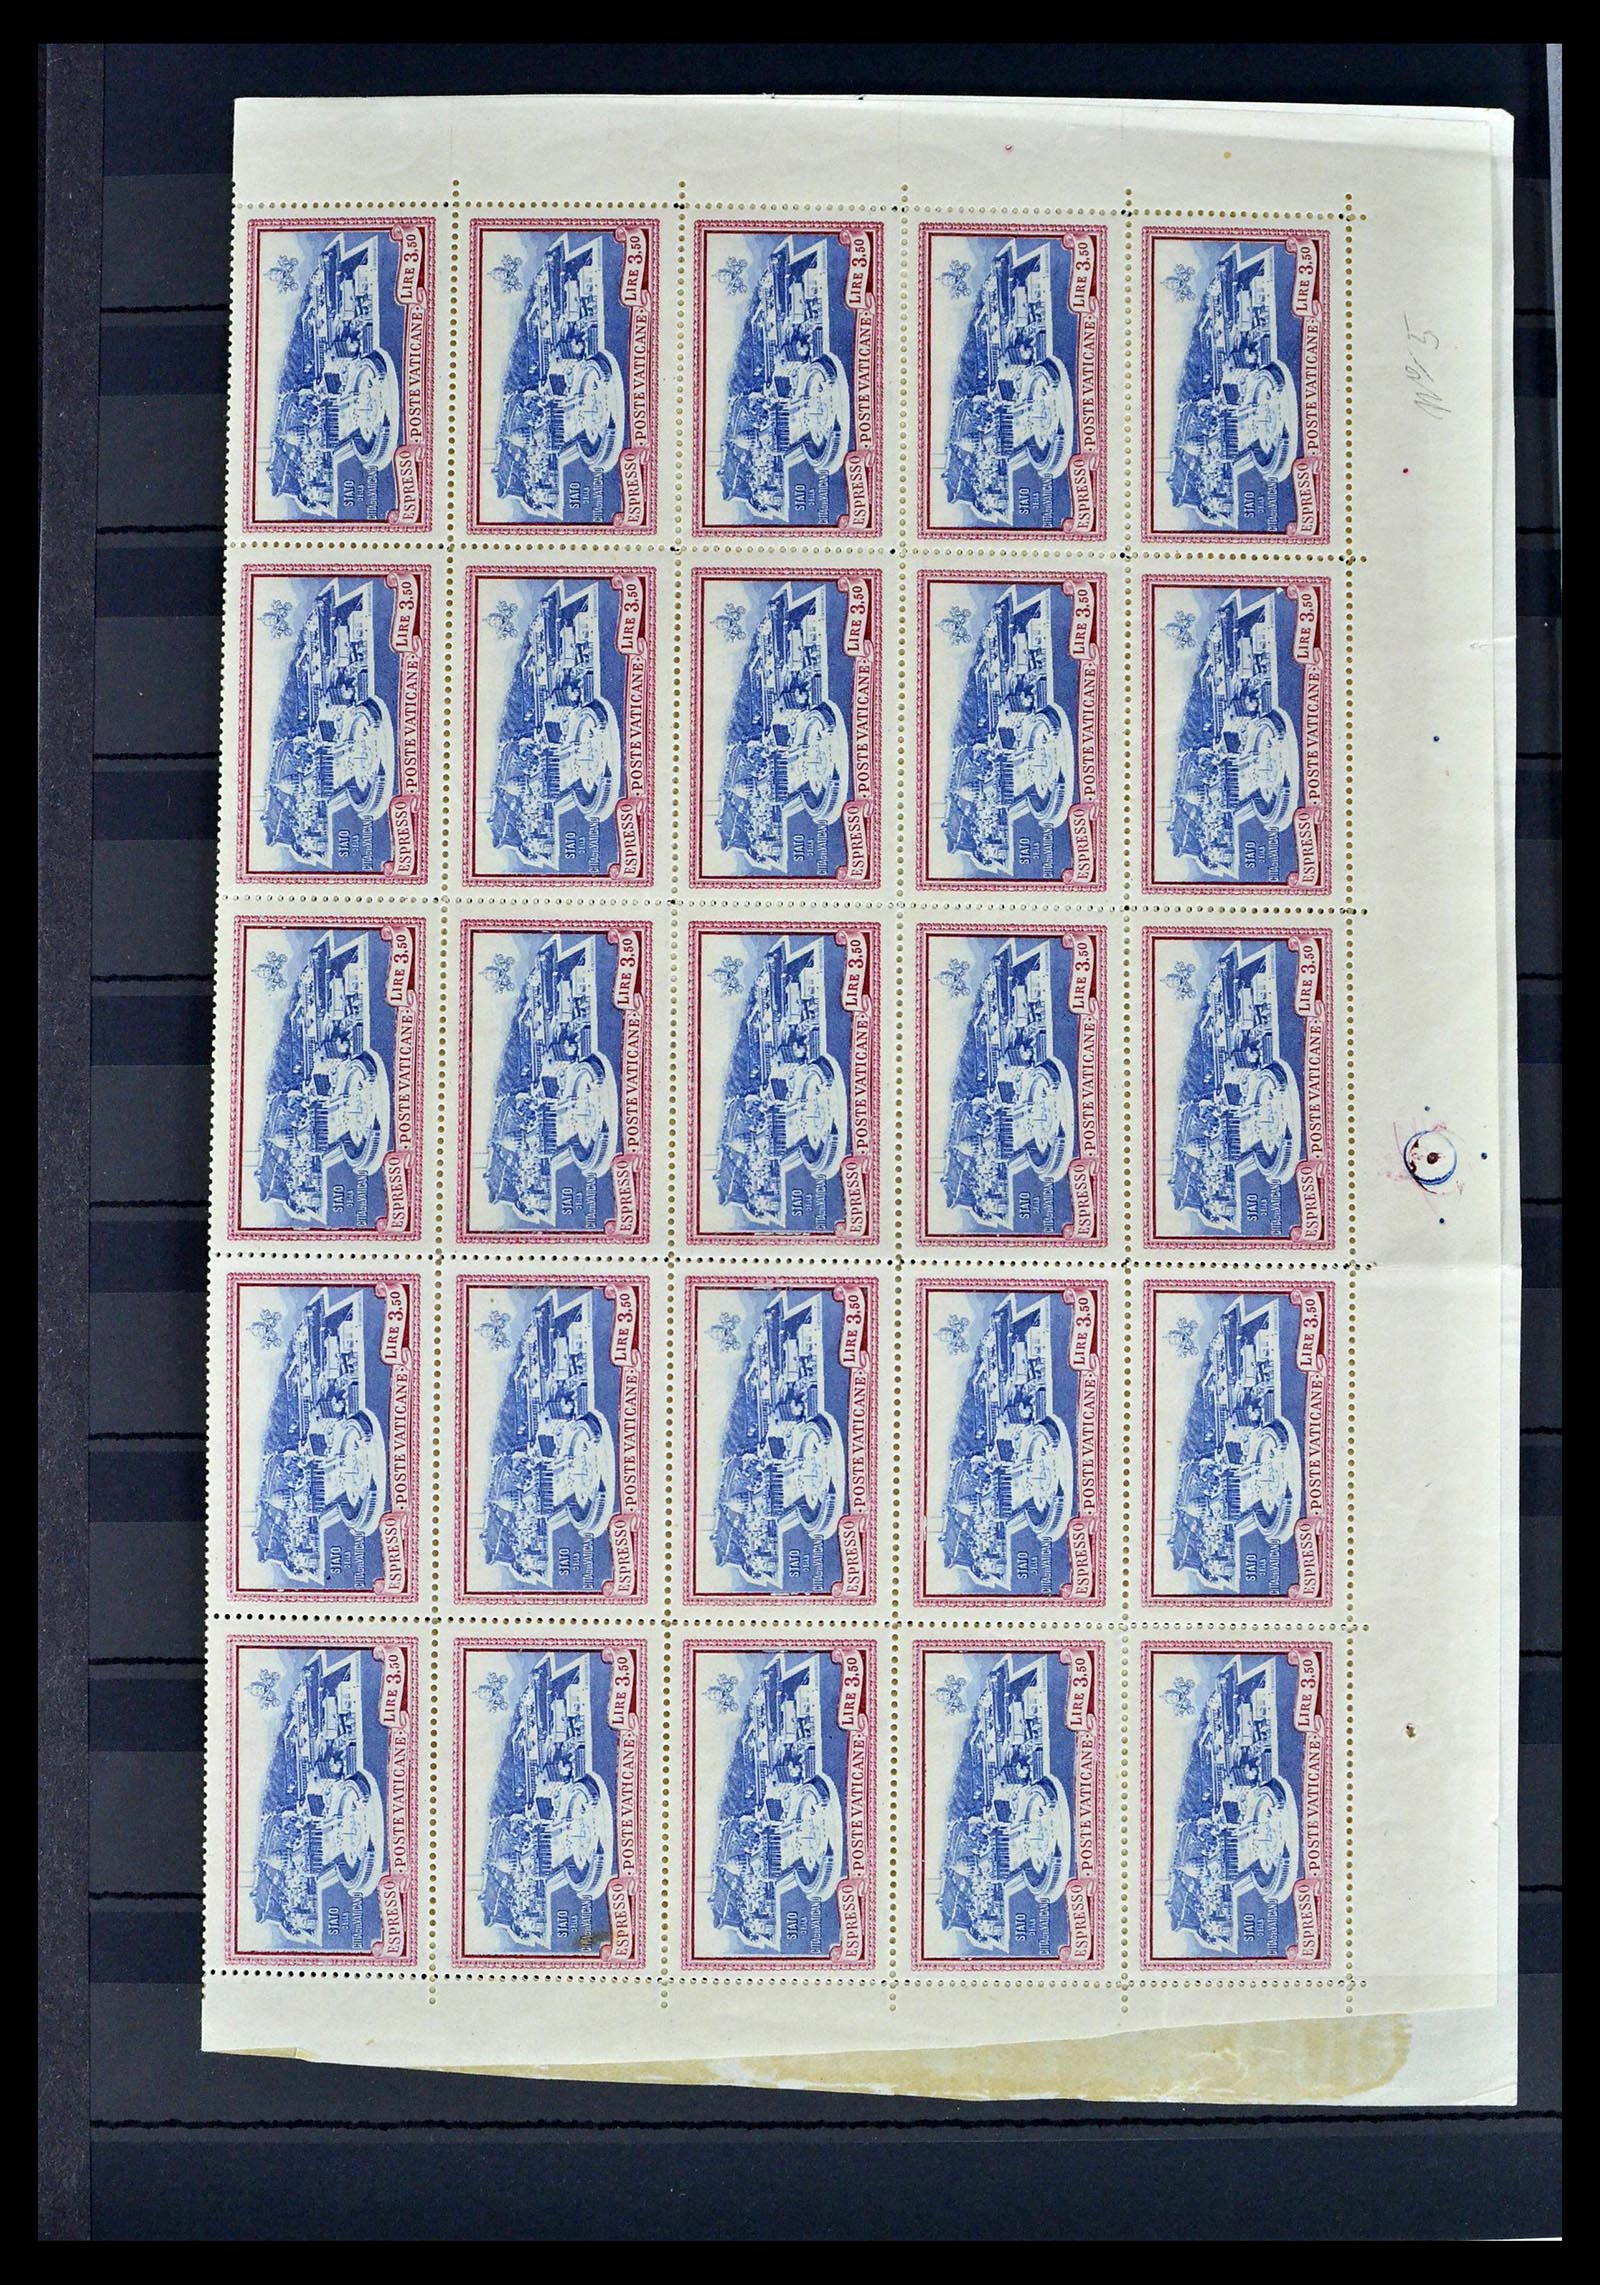 39236 0032 - Stamp collection 39236 European countries 40s-60s.